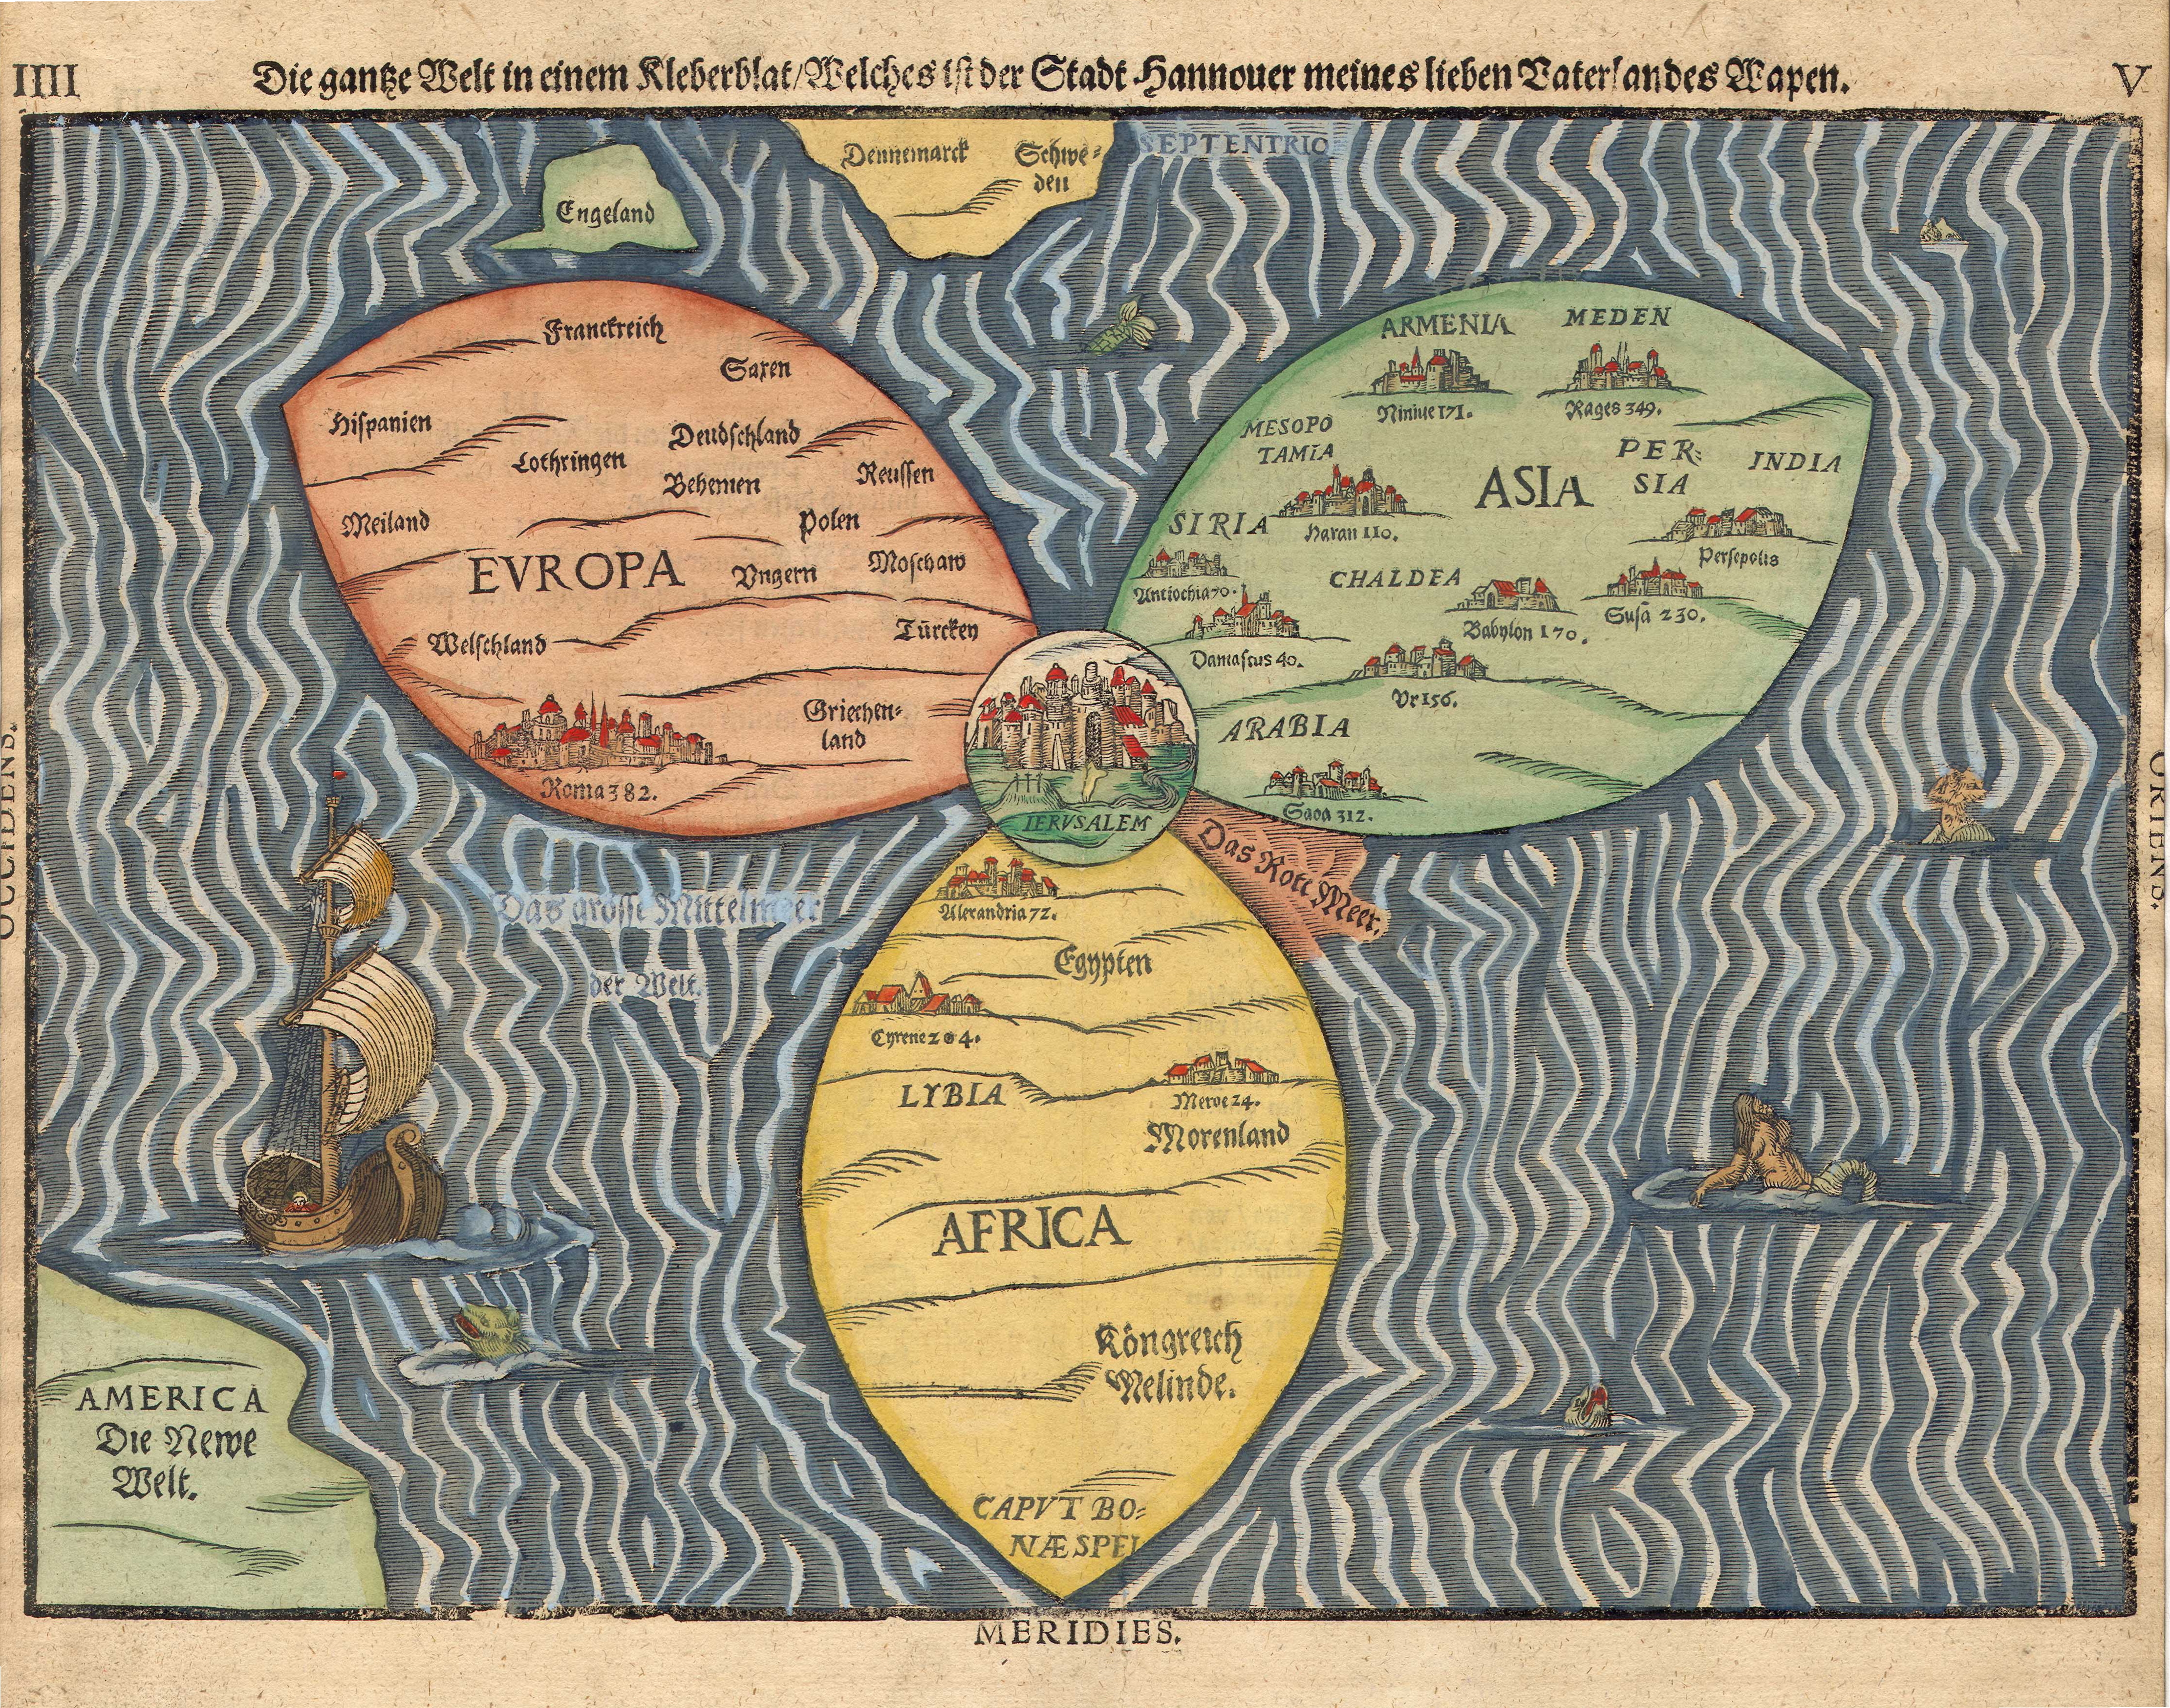 This map by Heinrich Bunting 1581 shows similar attributes to a universal history. While it depicts the world, accuracy is explicitly secondary to symbolism and meaning, specifically regarding continent shape and the position of Jerusalem.